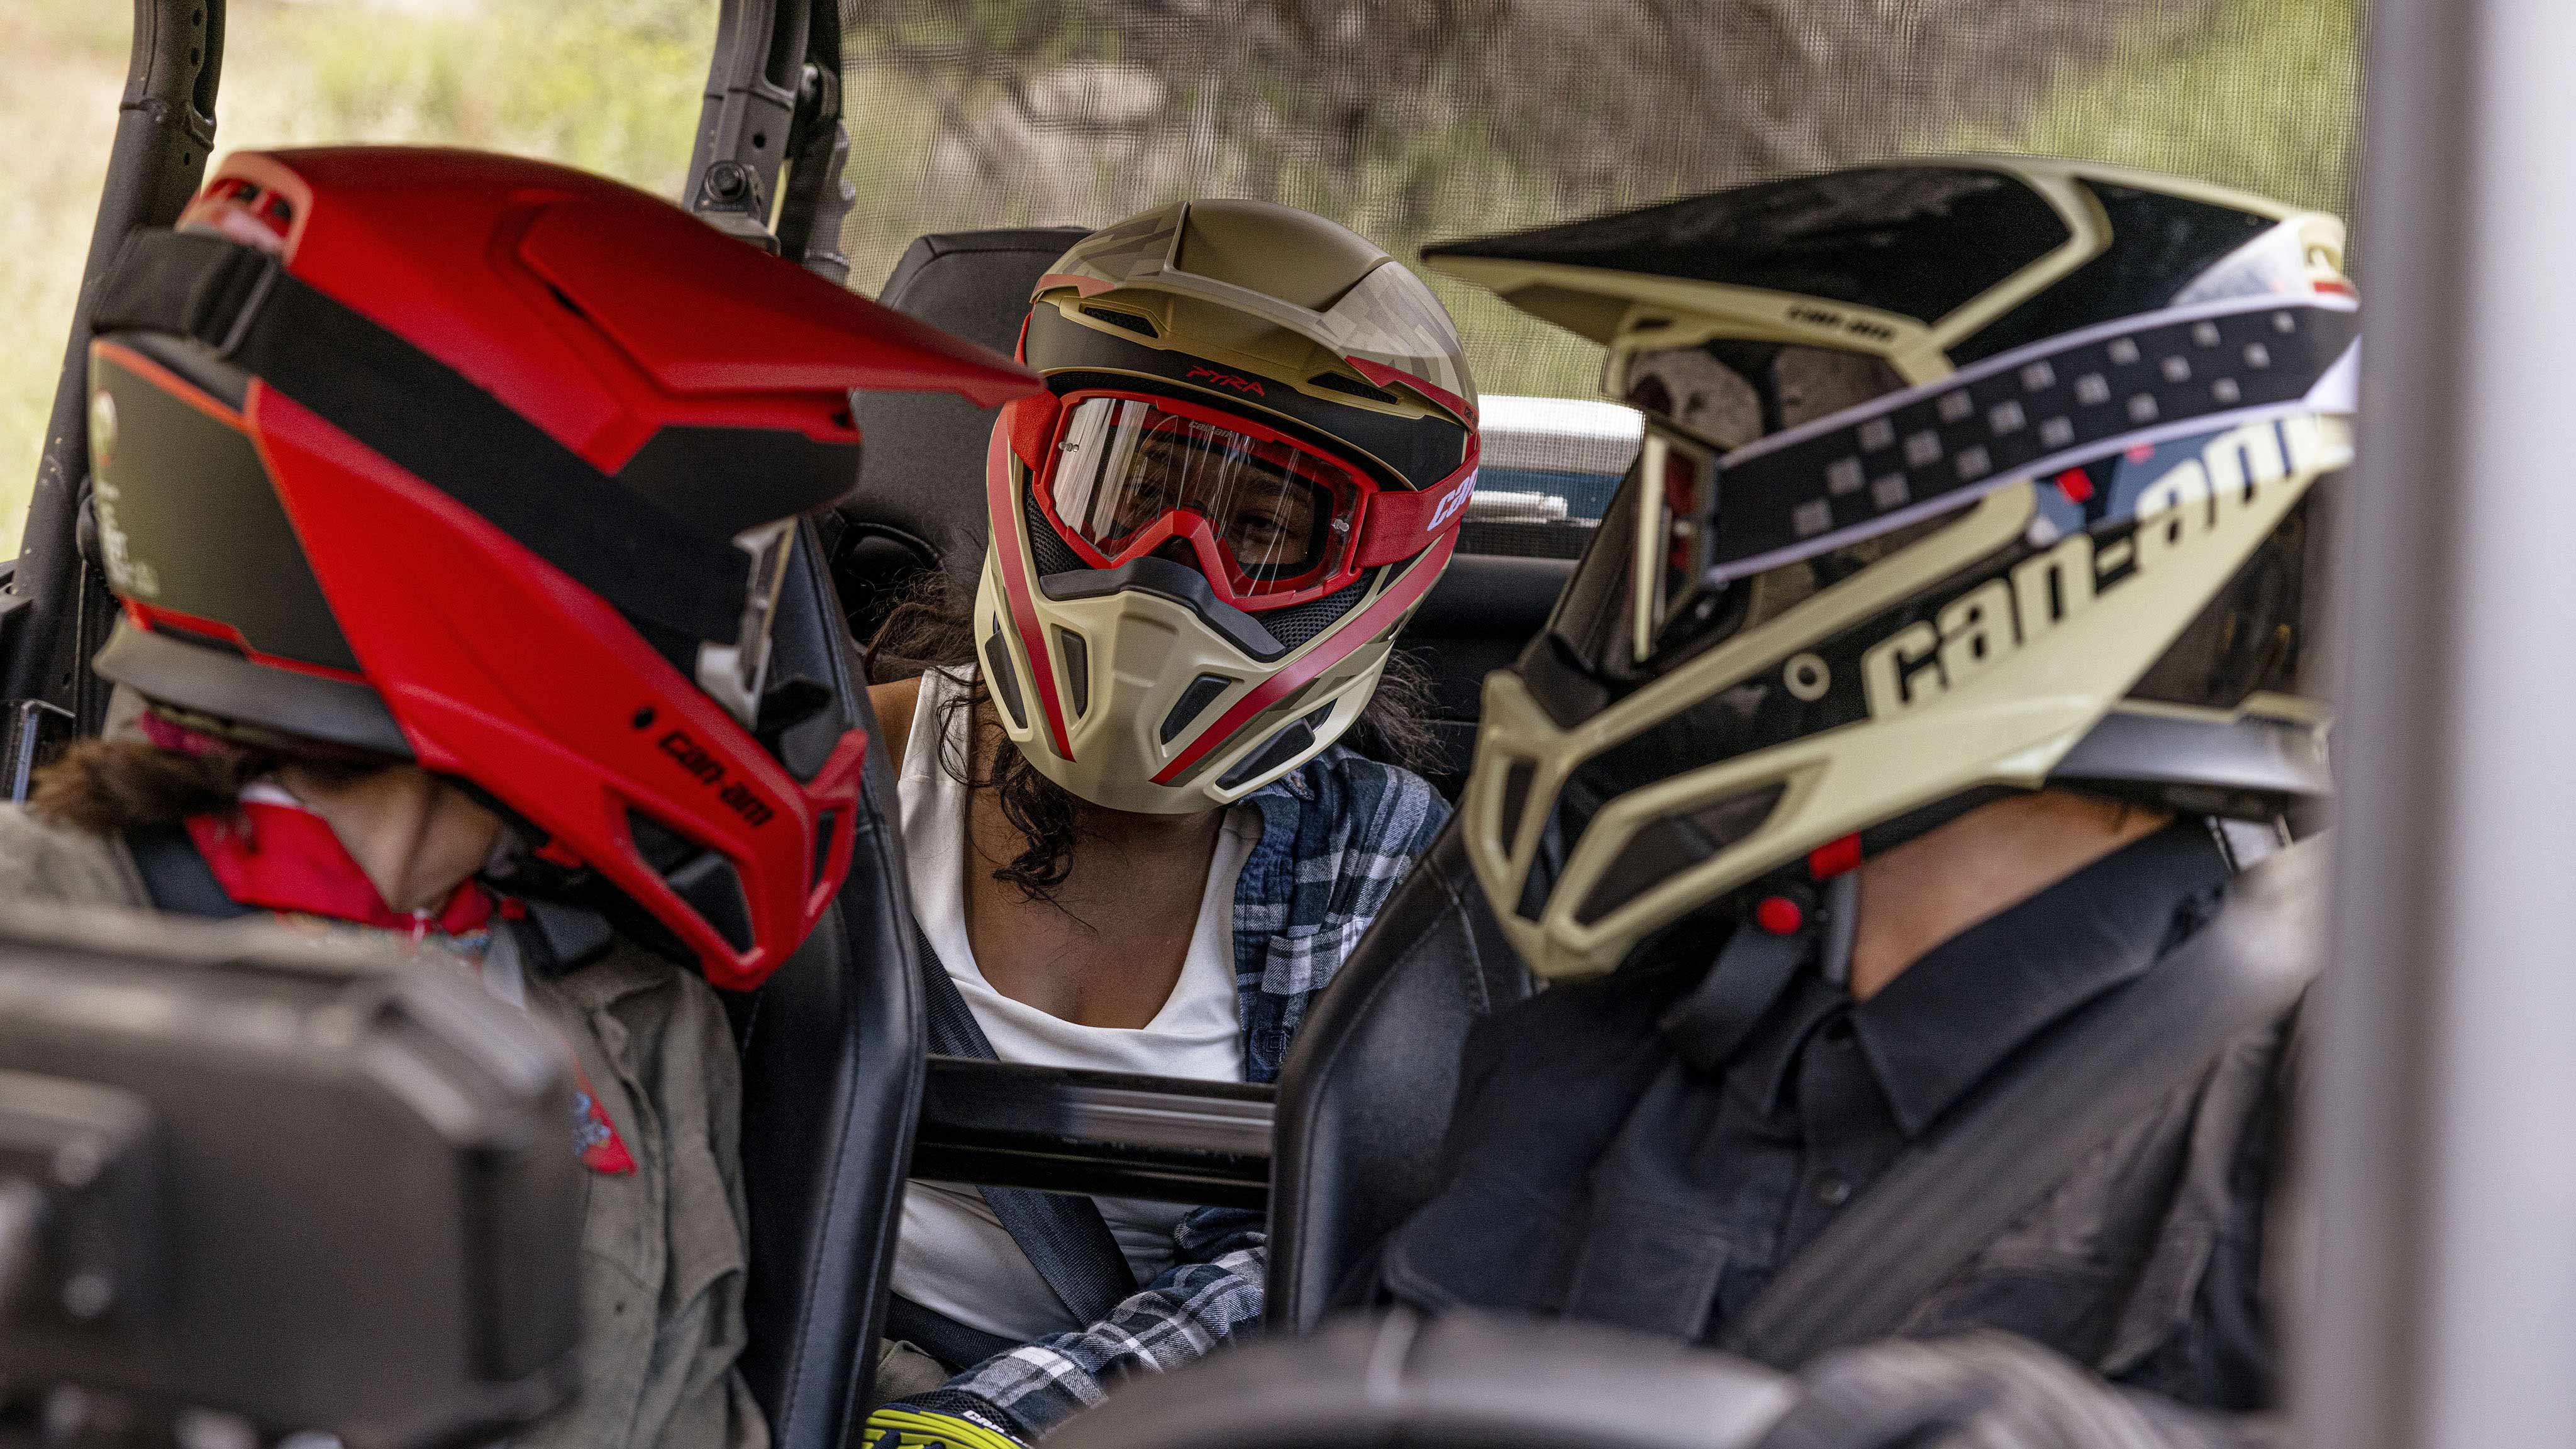 Three riders sitting in a Can-Am Off-Road vehicles wearing safety helmets